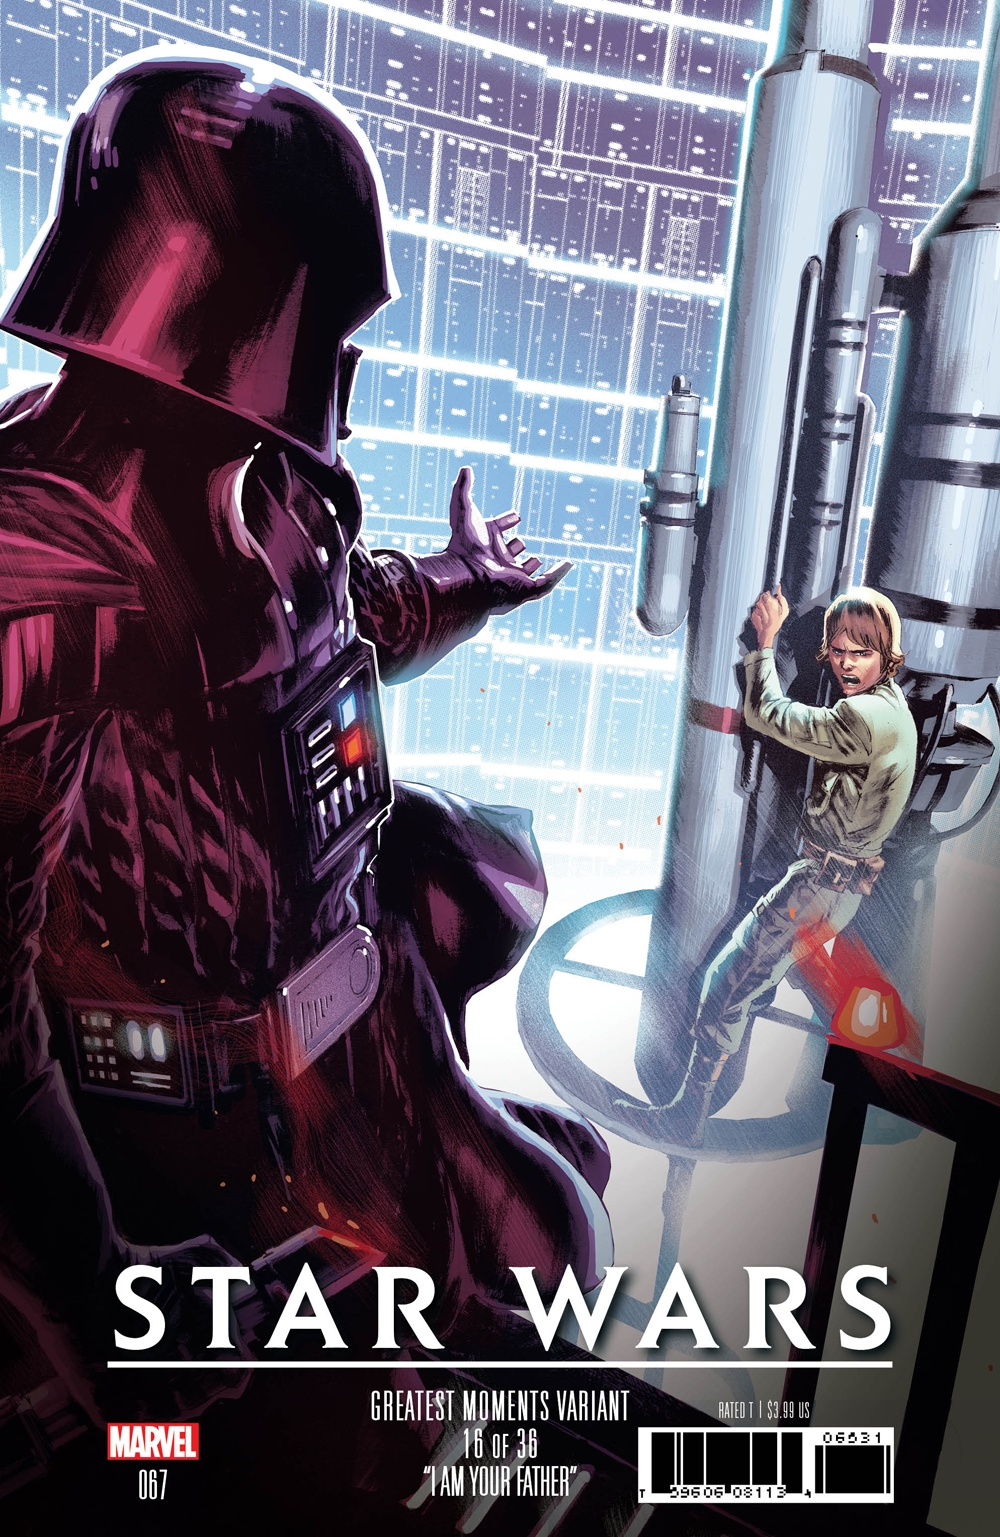 Star Wars #67 (Rafael Pinto Albuquerque Greatest Moments Variant Cover 16 of 36) (19.06.2019)